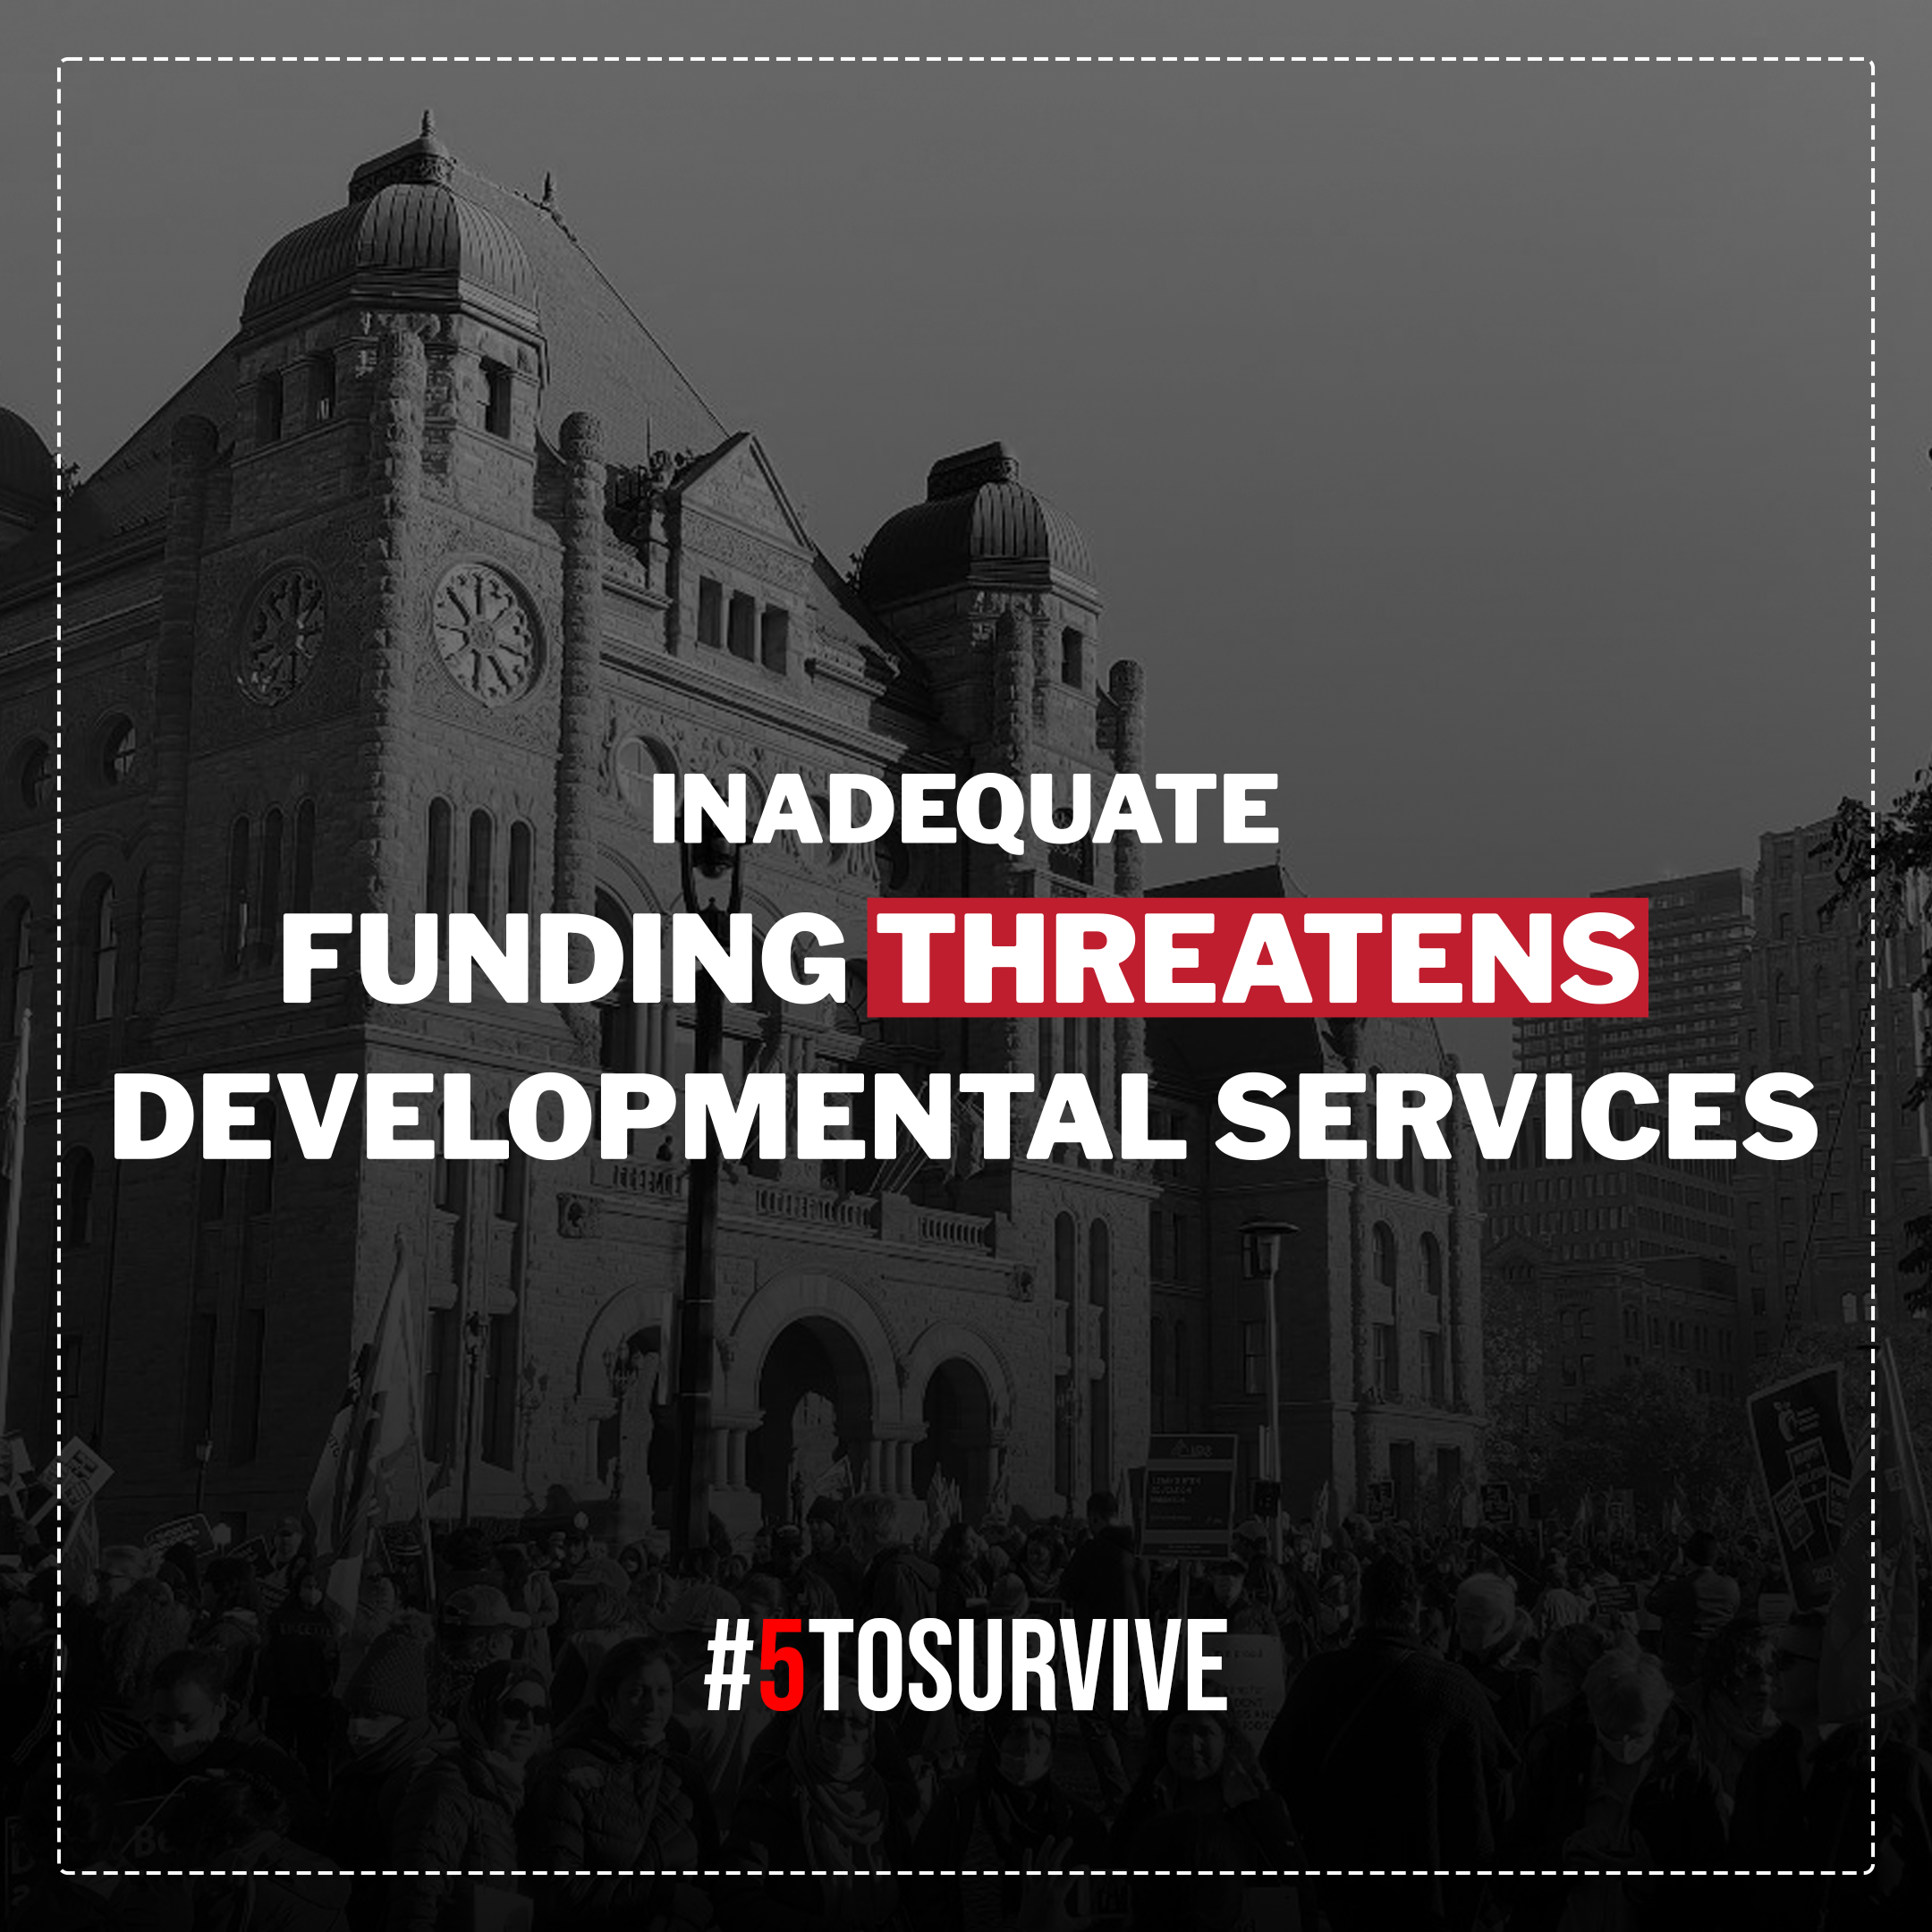 Inadequate funding is threatening Developmental Services